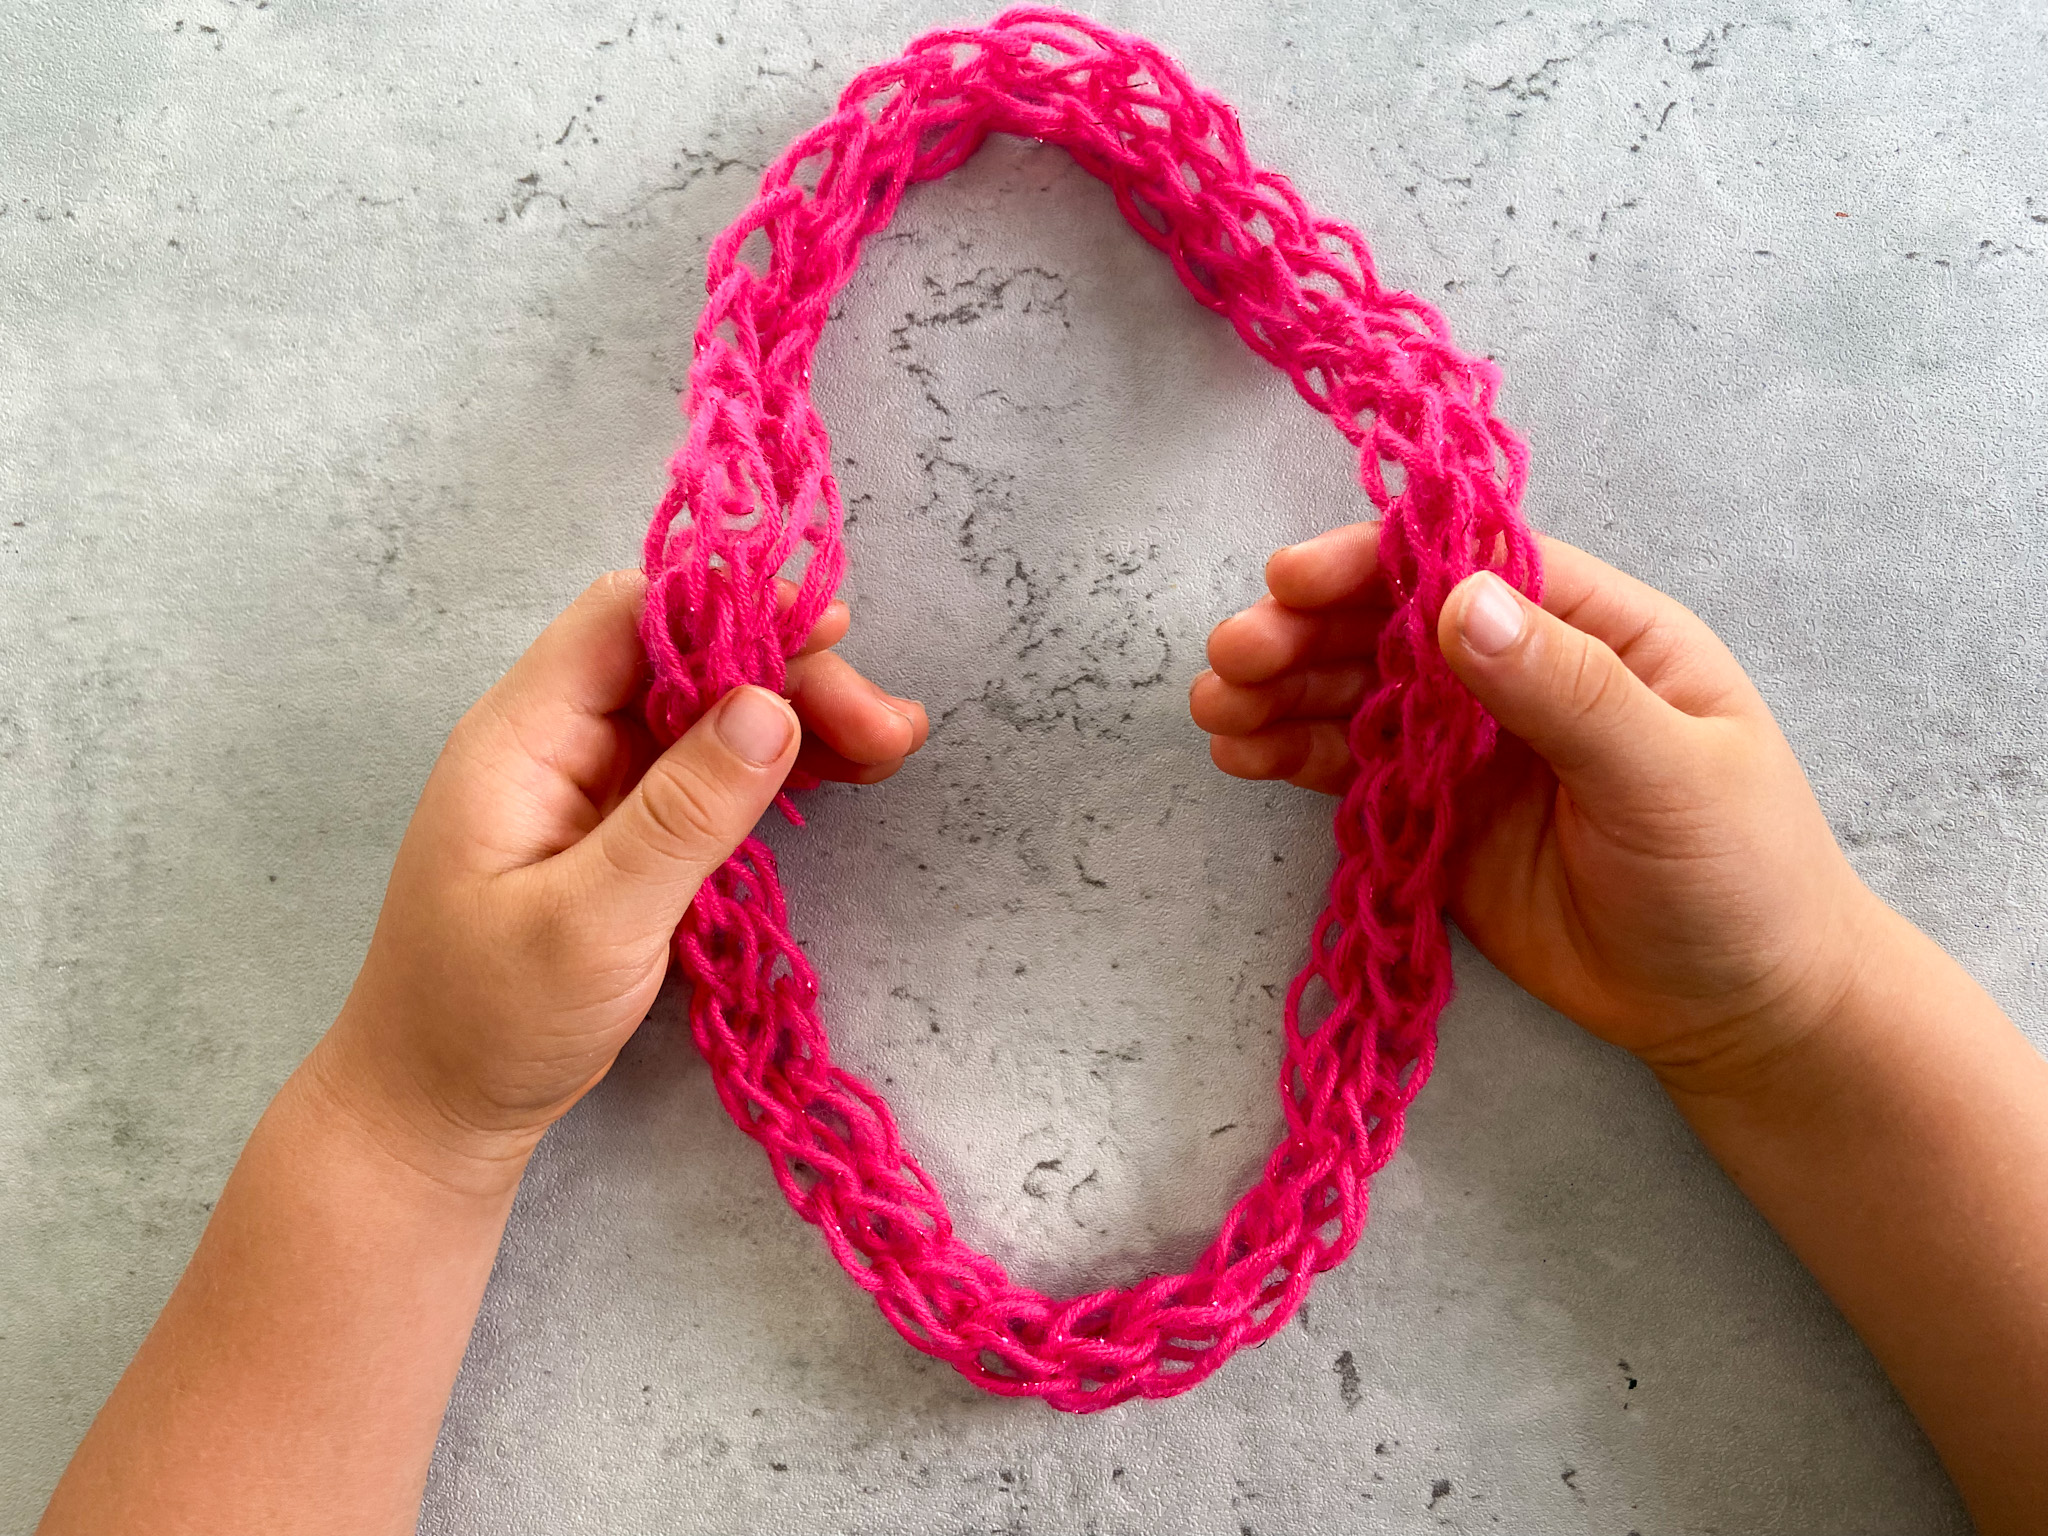 Yarn Craft with Kids: Finger Knitting - Tying An End